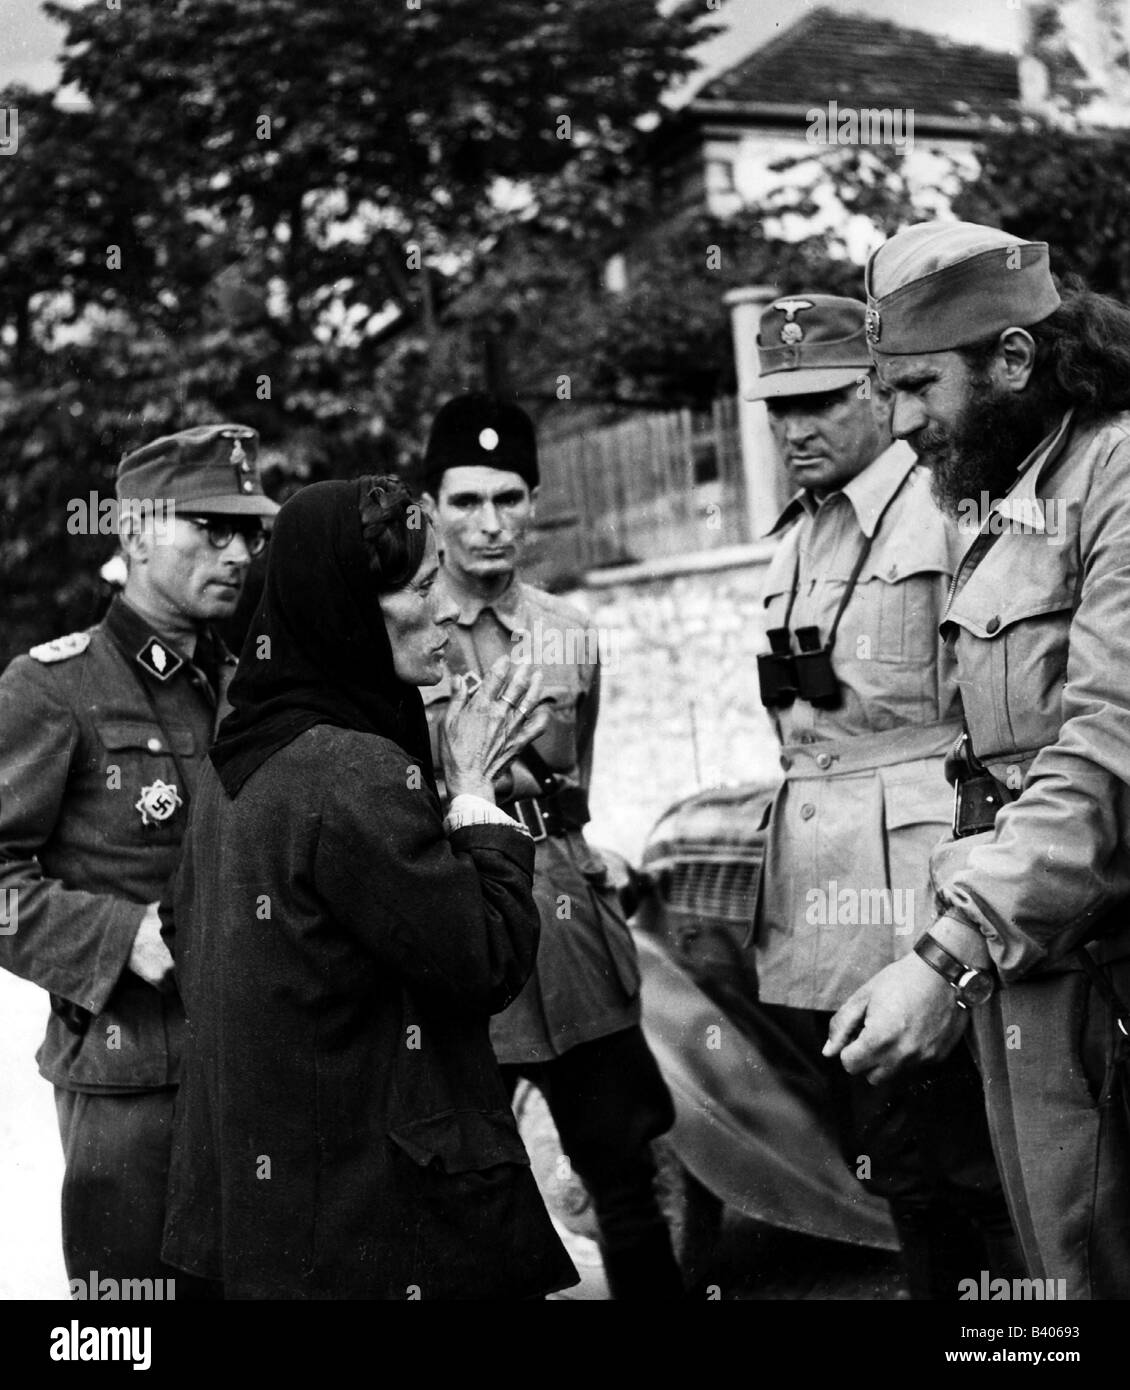 events, Second World War / WWII, Yugoslavia, German officers of the SS mountain troops with Yugoslavs (Ustases or Chetniks), questioning a woman, circa 1942, Stock Photo